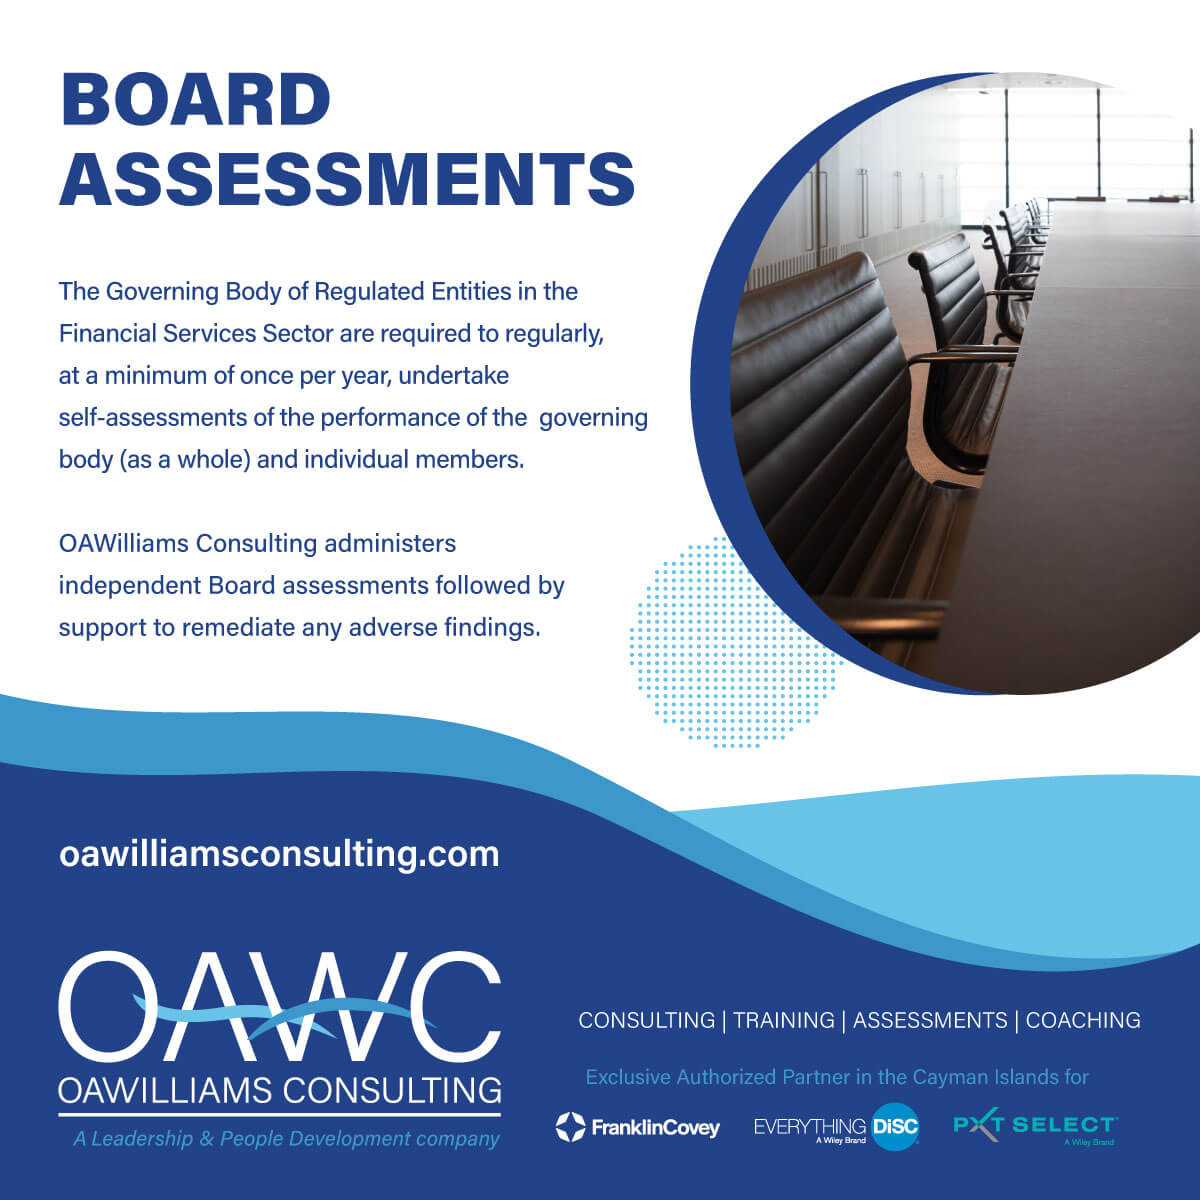 The Governing Body of Regulated Entities in the Financial Services Sector are required to regularly, at a minimum of once per year, undertake self-assessments of the performance of the governing body (as a whole) and individual members. OAWilliams Consulting administers independent Board assessments followed by support to remediate any adverse findings.